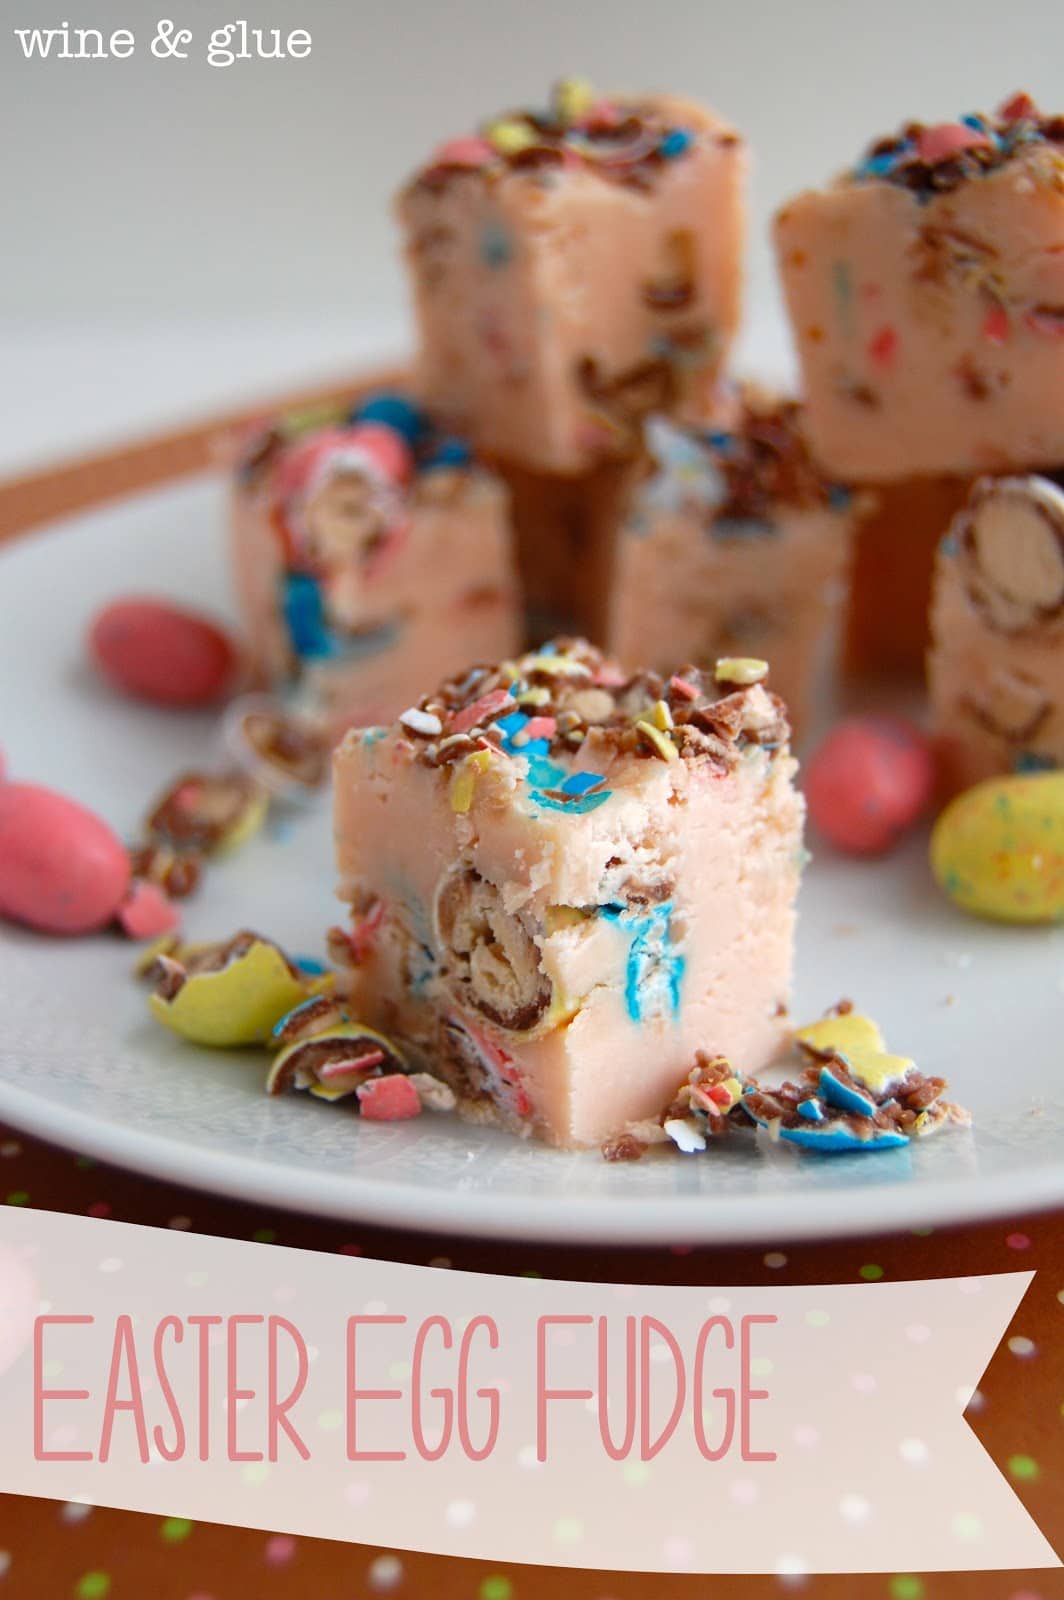 Easter Egg Fudge by Wine & Glue whoppers desserts